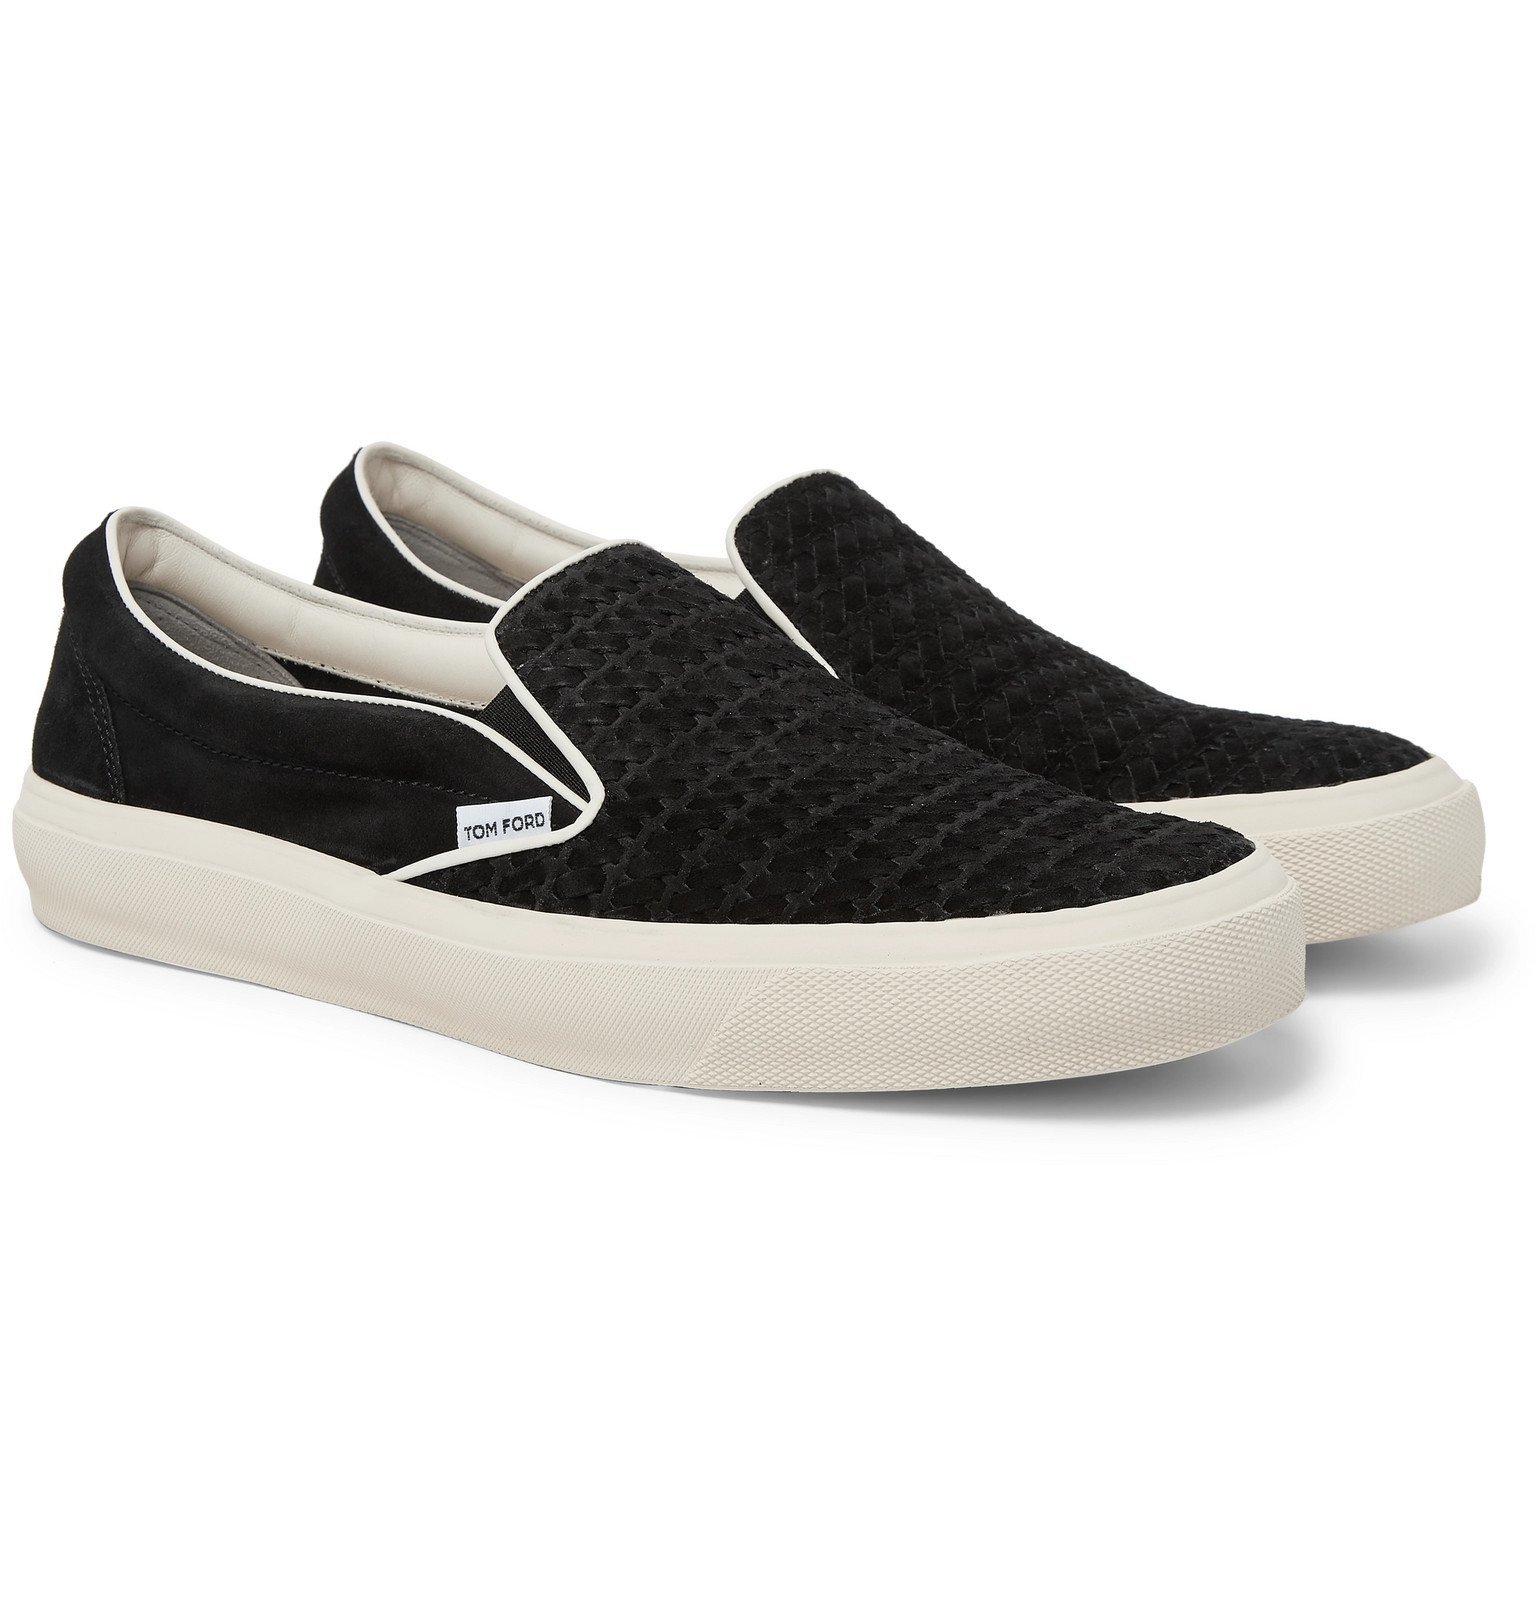 TOM FORD - Cambridge Leather-Trimmed Woven Suede Slip-On Sneakers - Black  TOM FORD